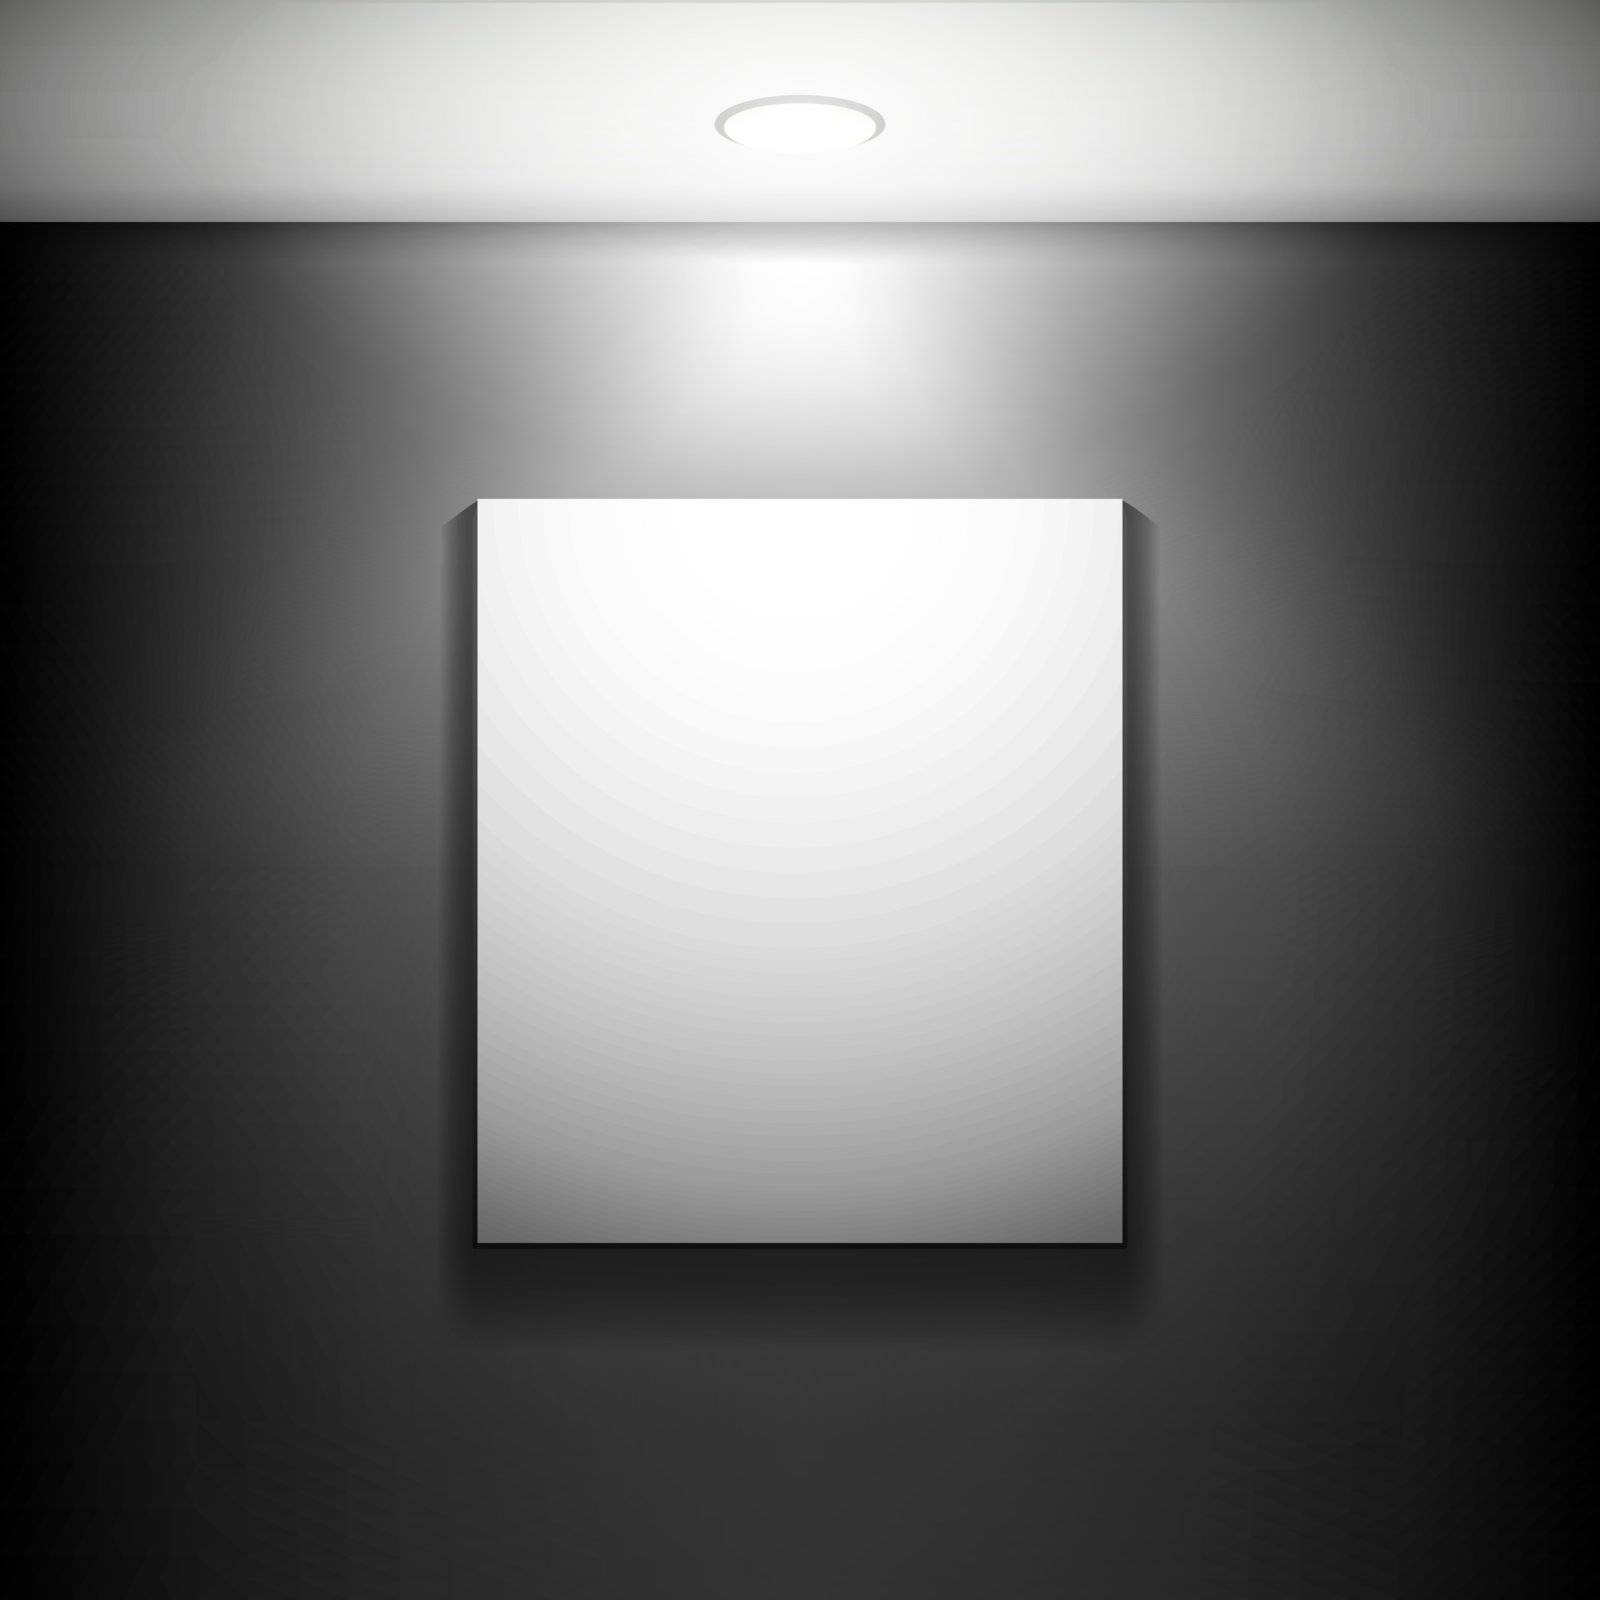 The white frame on a wall.